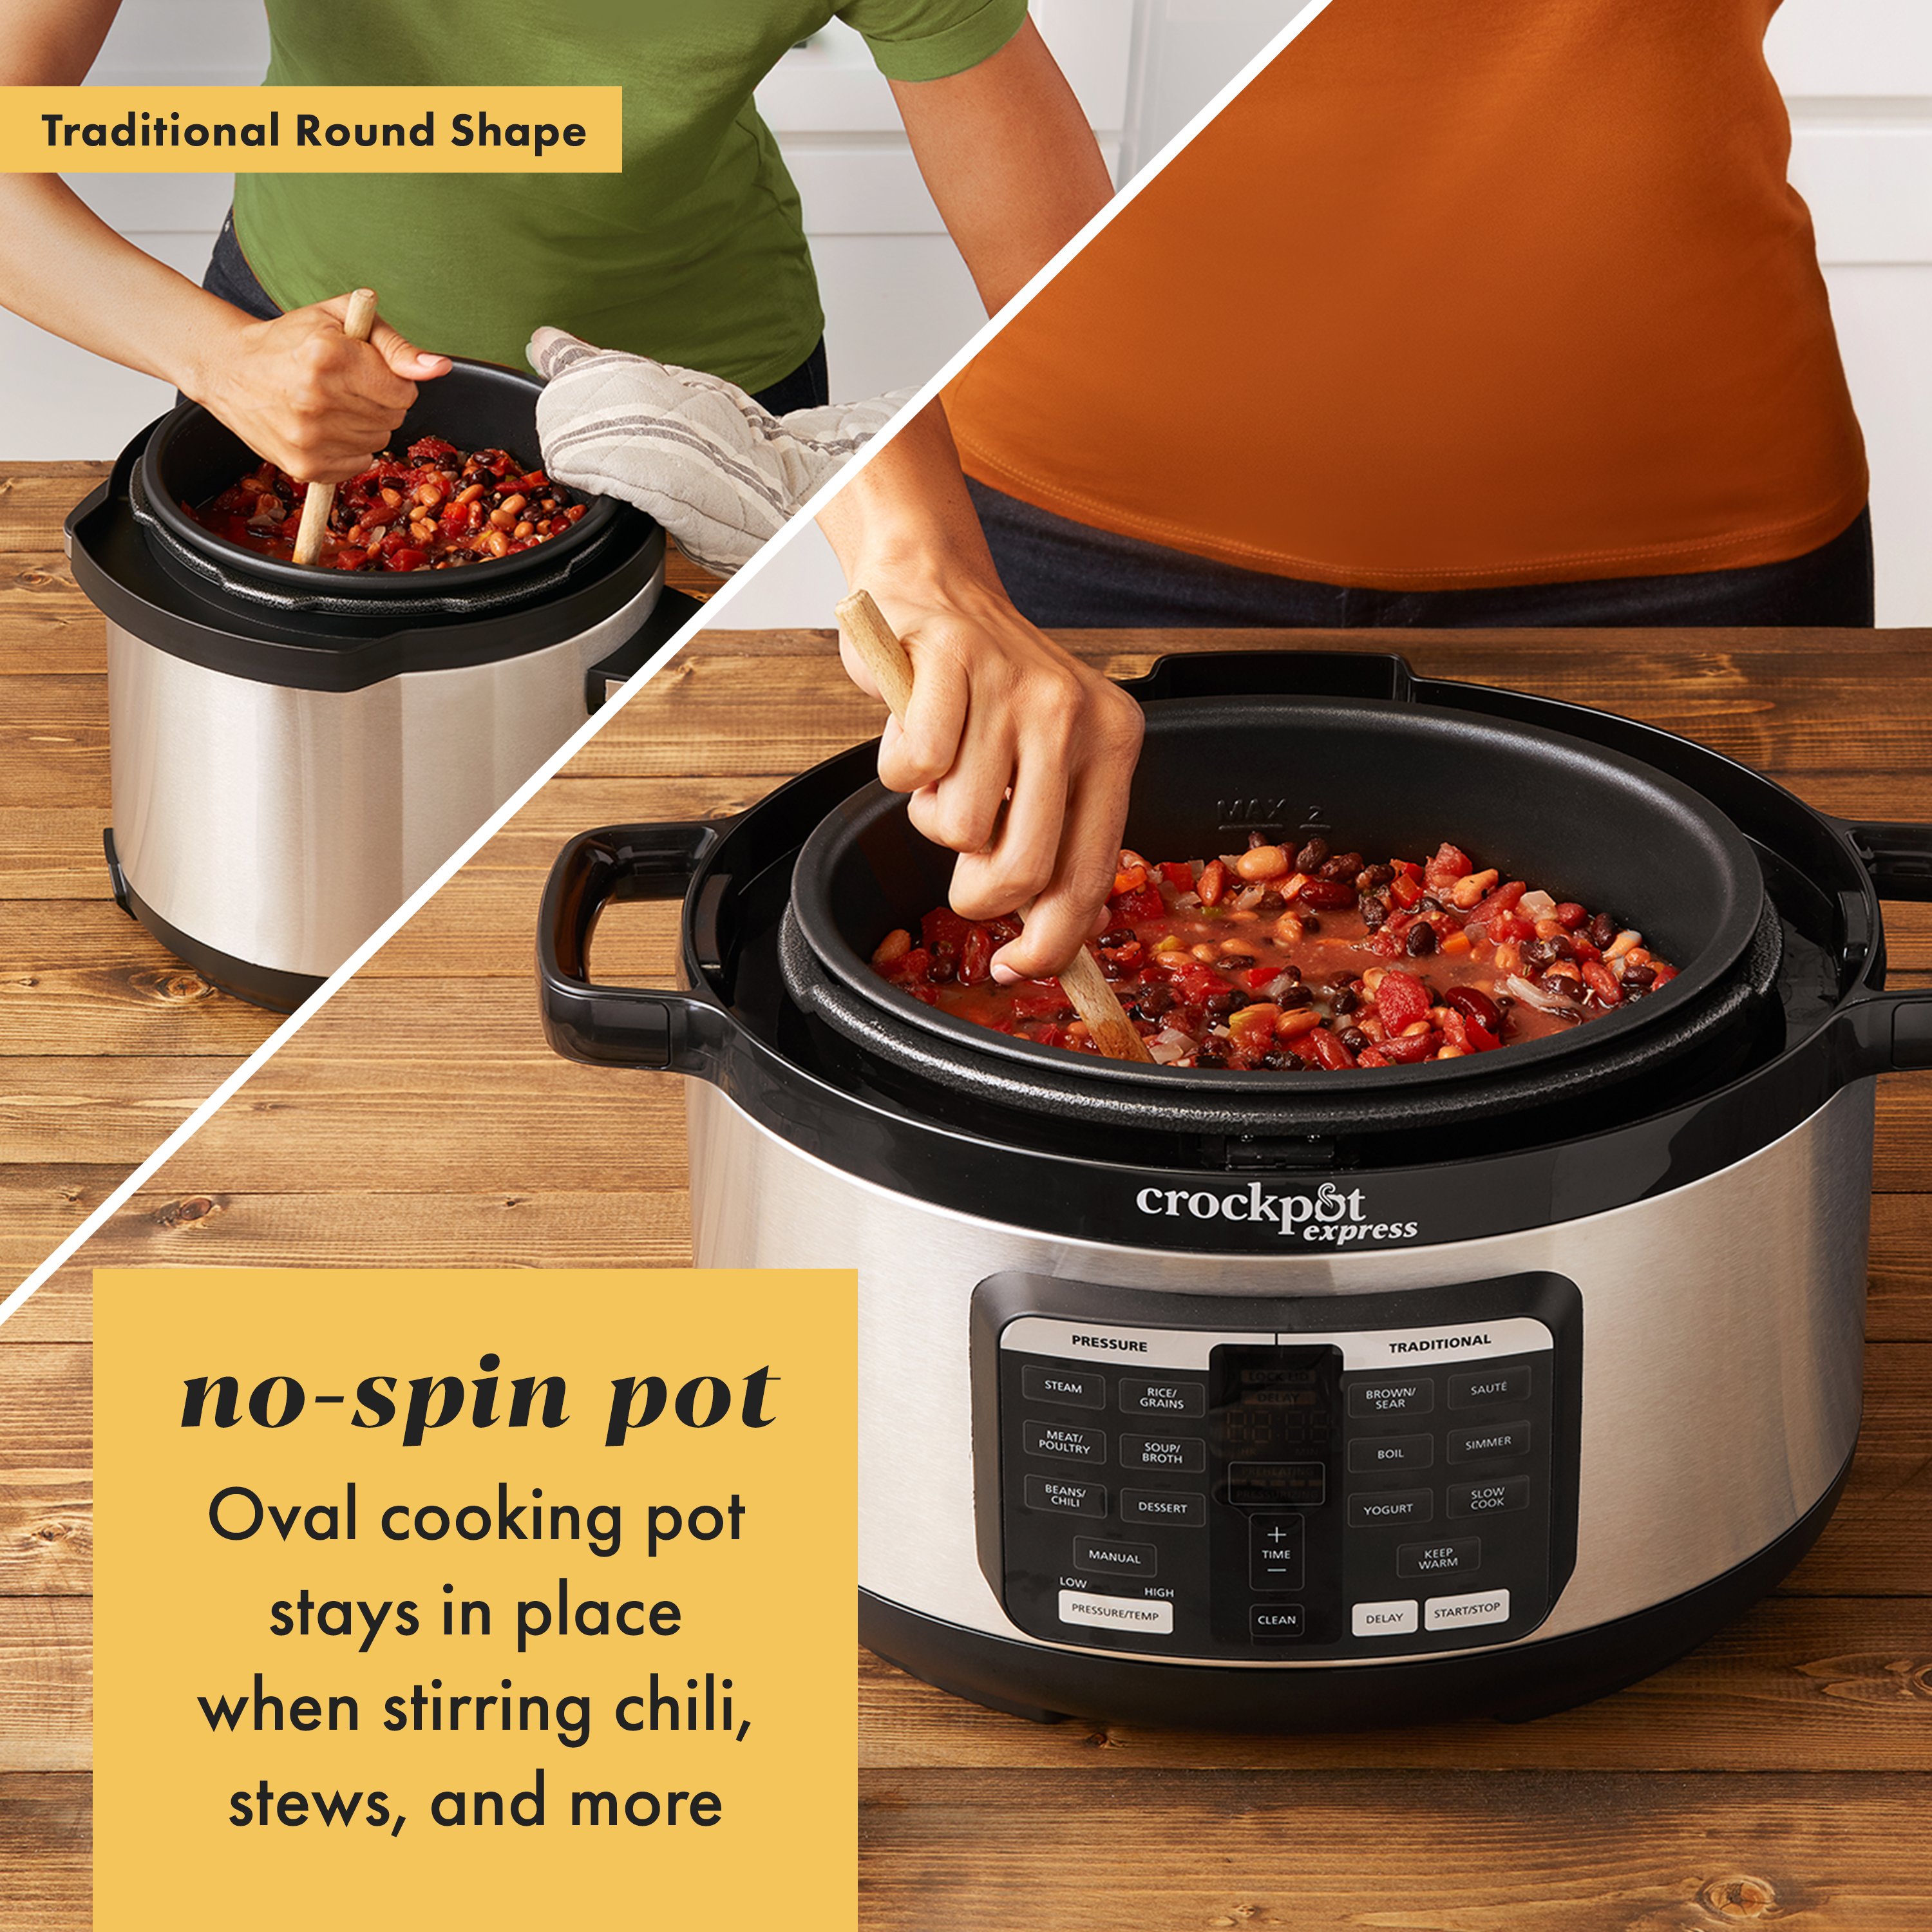 RIVAL Crock Pot BBQ Pit Countertop Slow Roaster Meat Cooker NEW